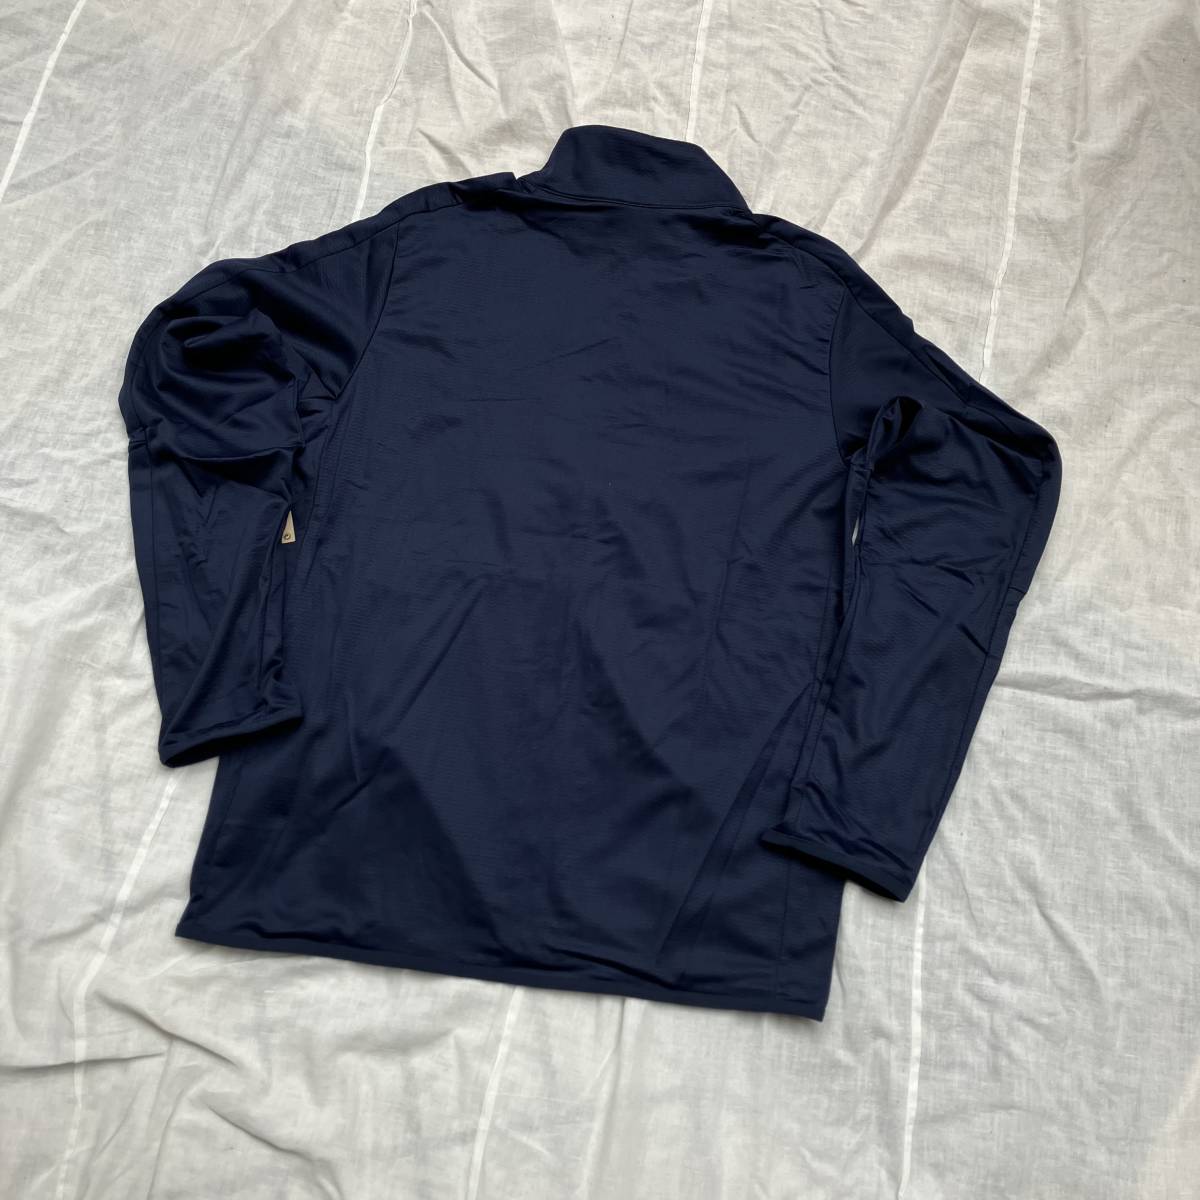  new goods unused goods *NIKE Nike * men's XL size [DFe pick knitted jersey top and bottom set ] jersey top and bottom set navy blue navy DM6594/DM6598